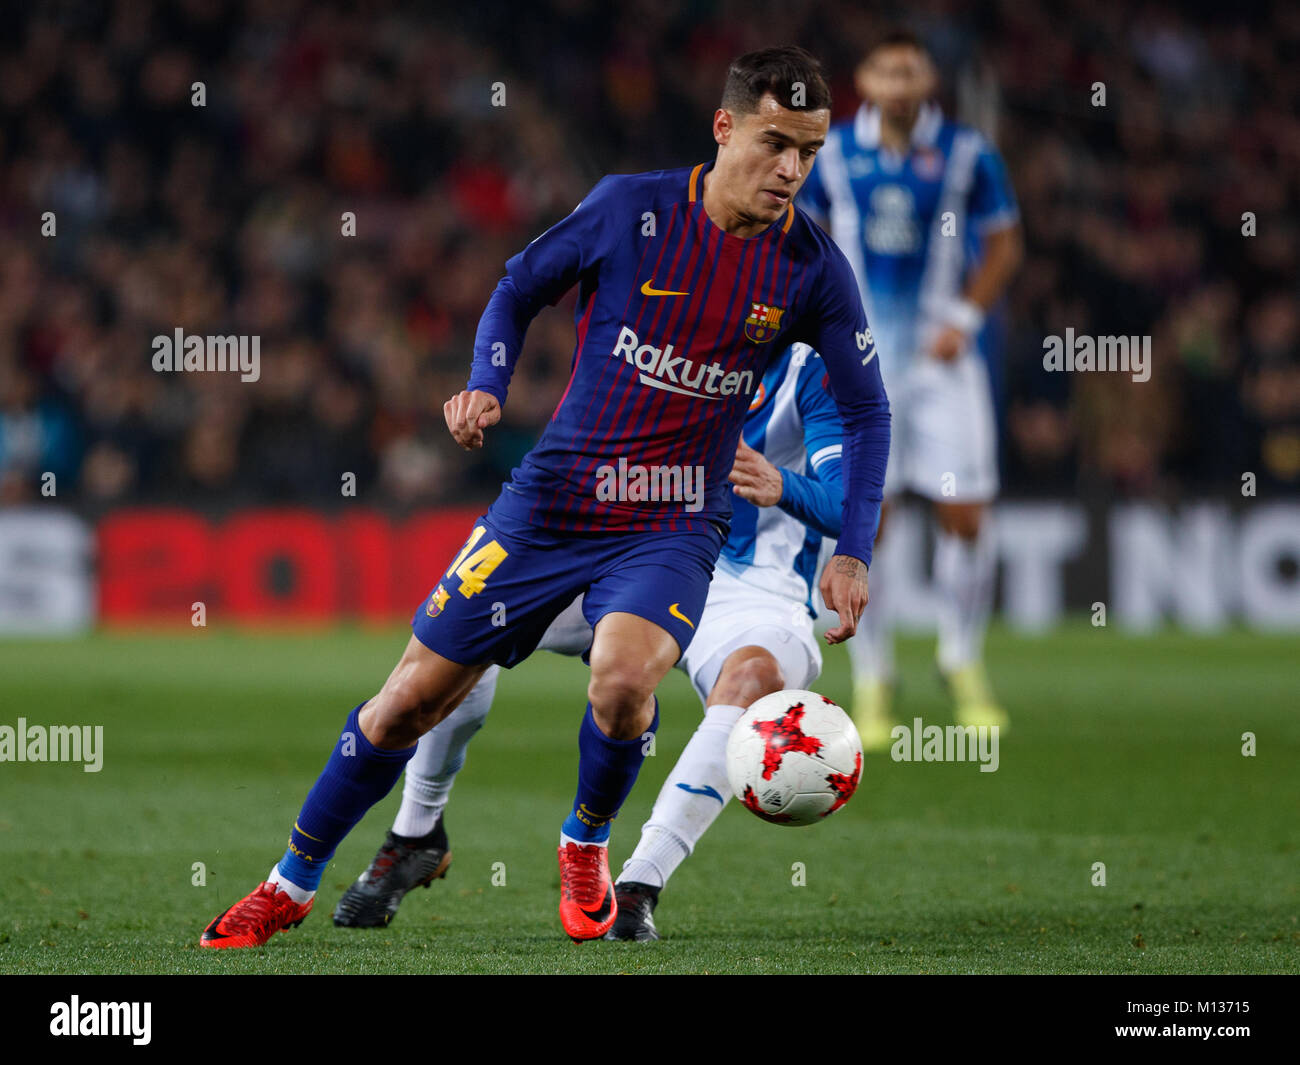 Barcelona, Spain. 25th January, 2018.  Copa del Rey football, quarter final, second leg, Barcelona versus Espanyol; Coutinho with the ball. Credit: UKKO Images/Alamy Live News Stock Photo